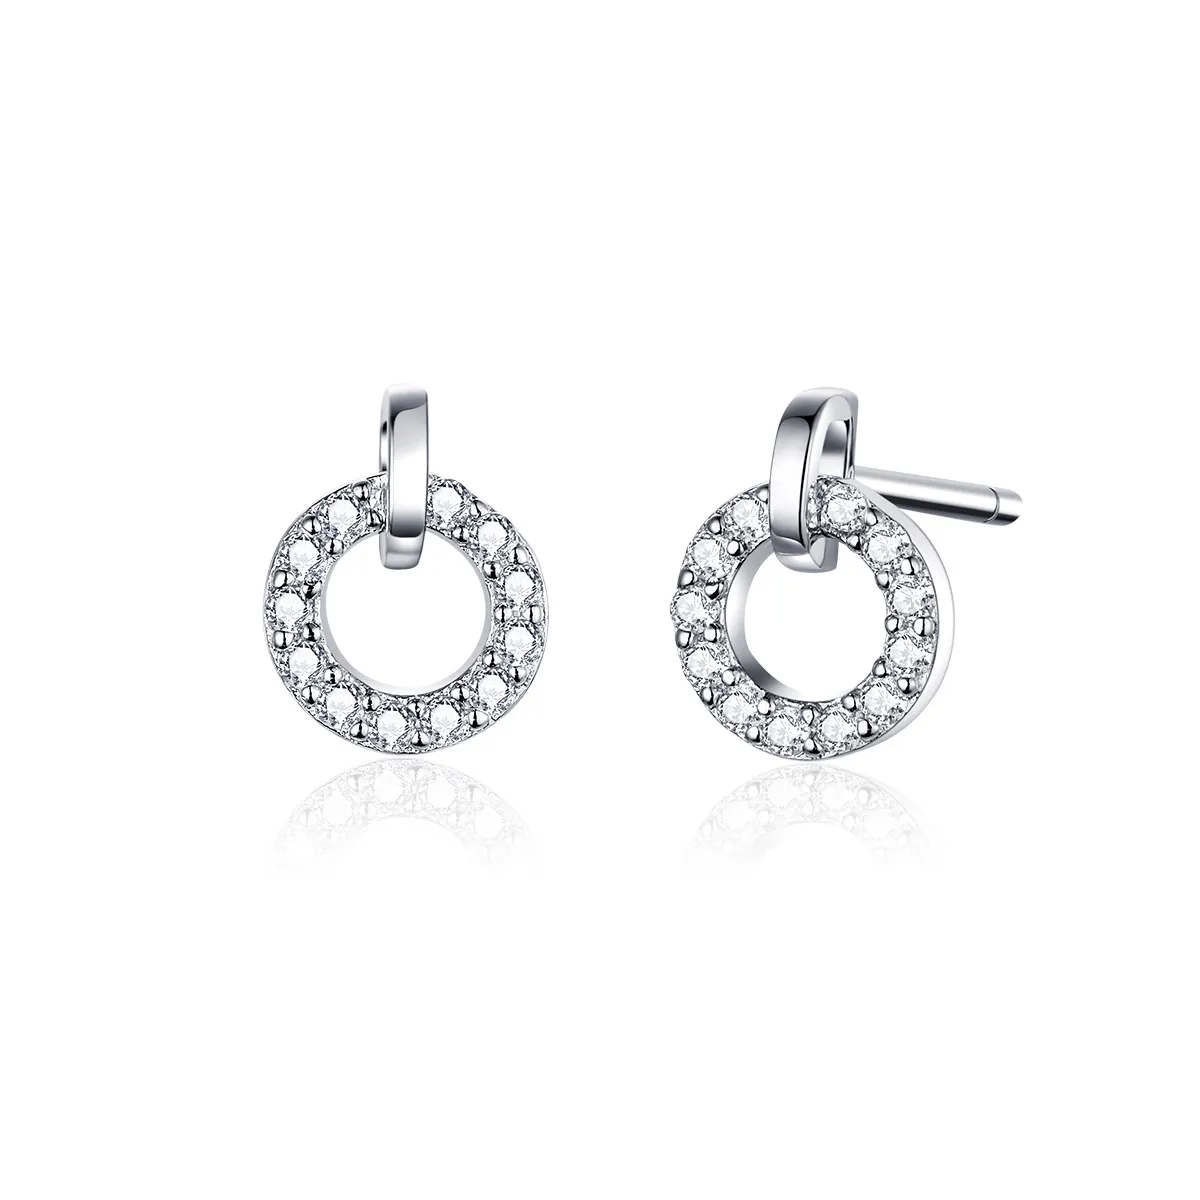 Pandora Style Silver Small Circle Stud Earrings - SCE767